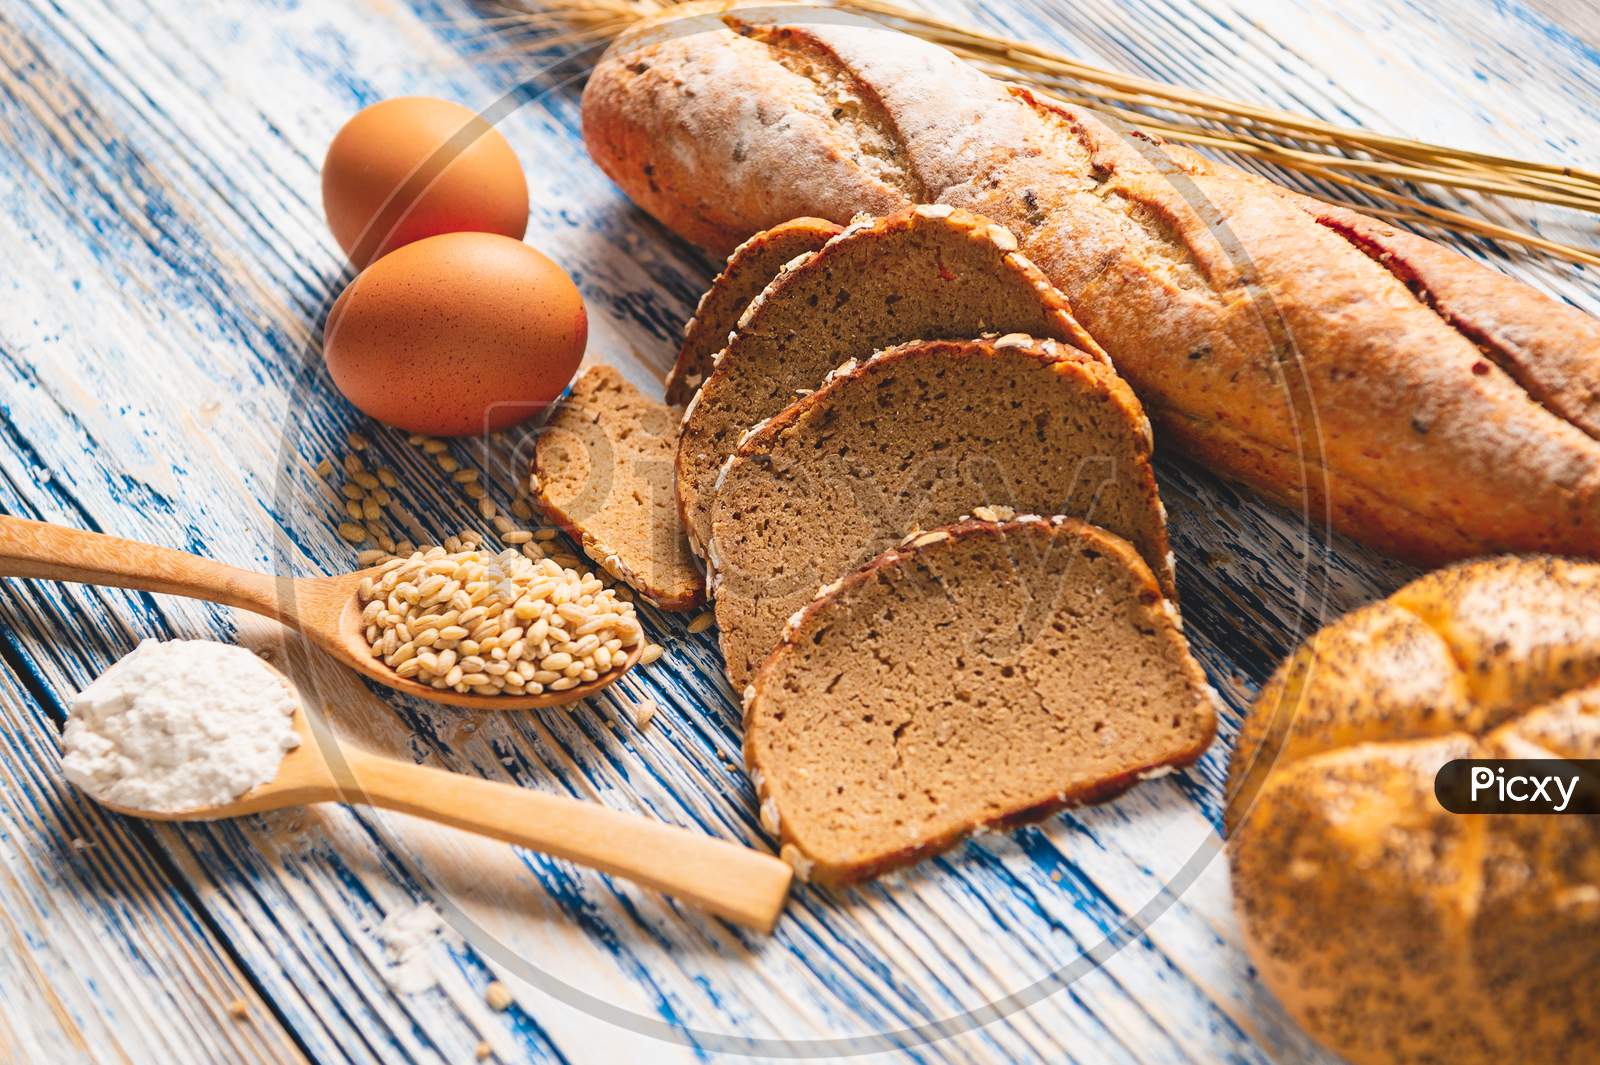 Different Kinds Of Bread With Nutrition Whole Grains On Wooden Background. Food And Bakery In Kitchen Concept. Delicious Breakfast Gouemet And Meal. Carbohydrate Organic Food Cuisine Homemade